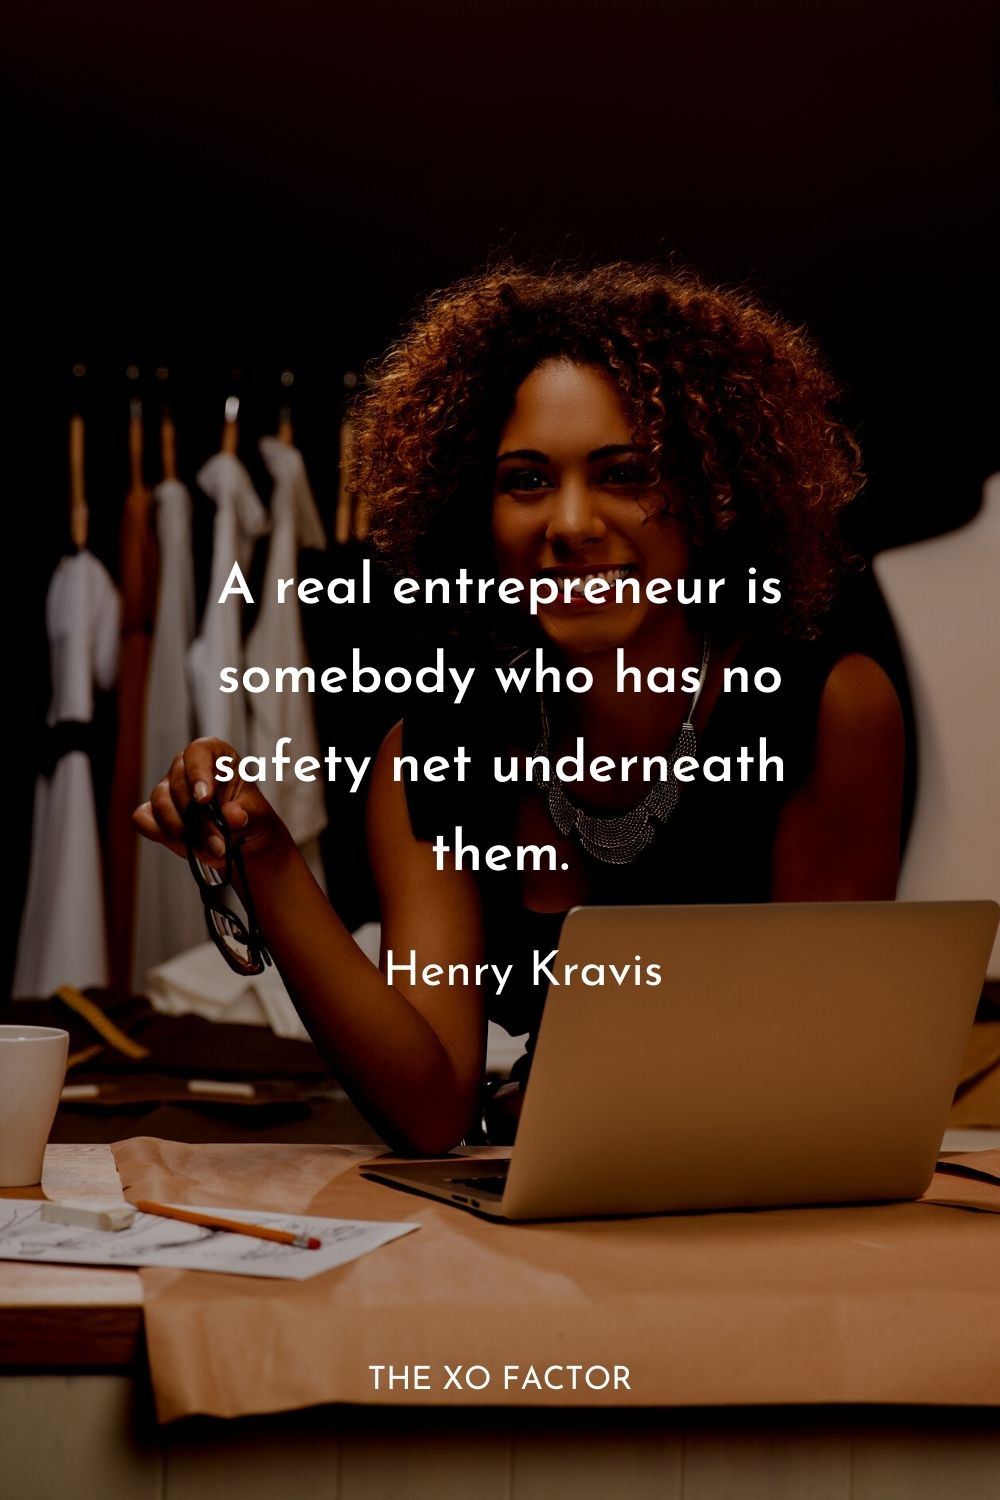 A real entrepreneur is somebody who has no safety net underneath them.